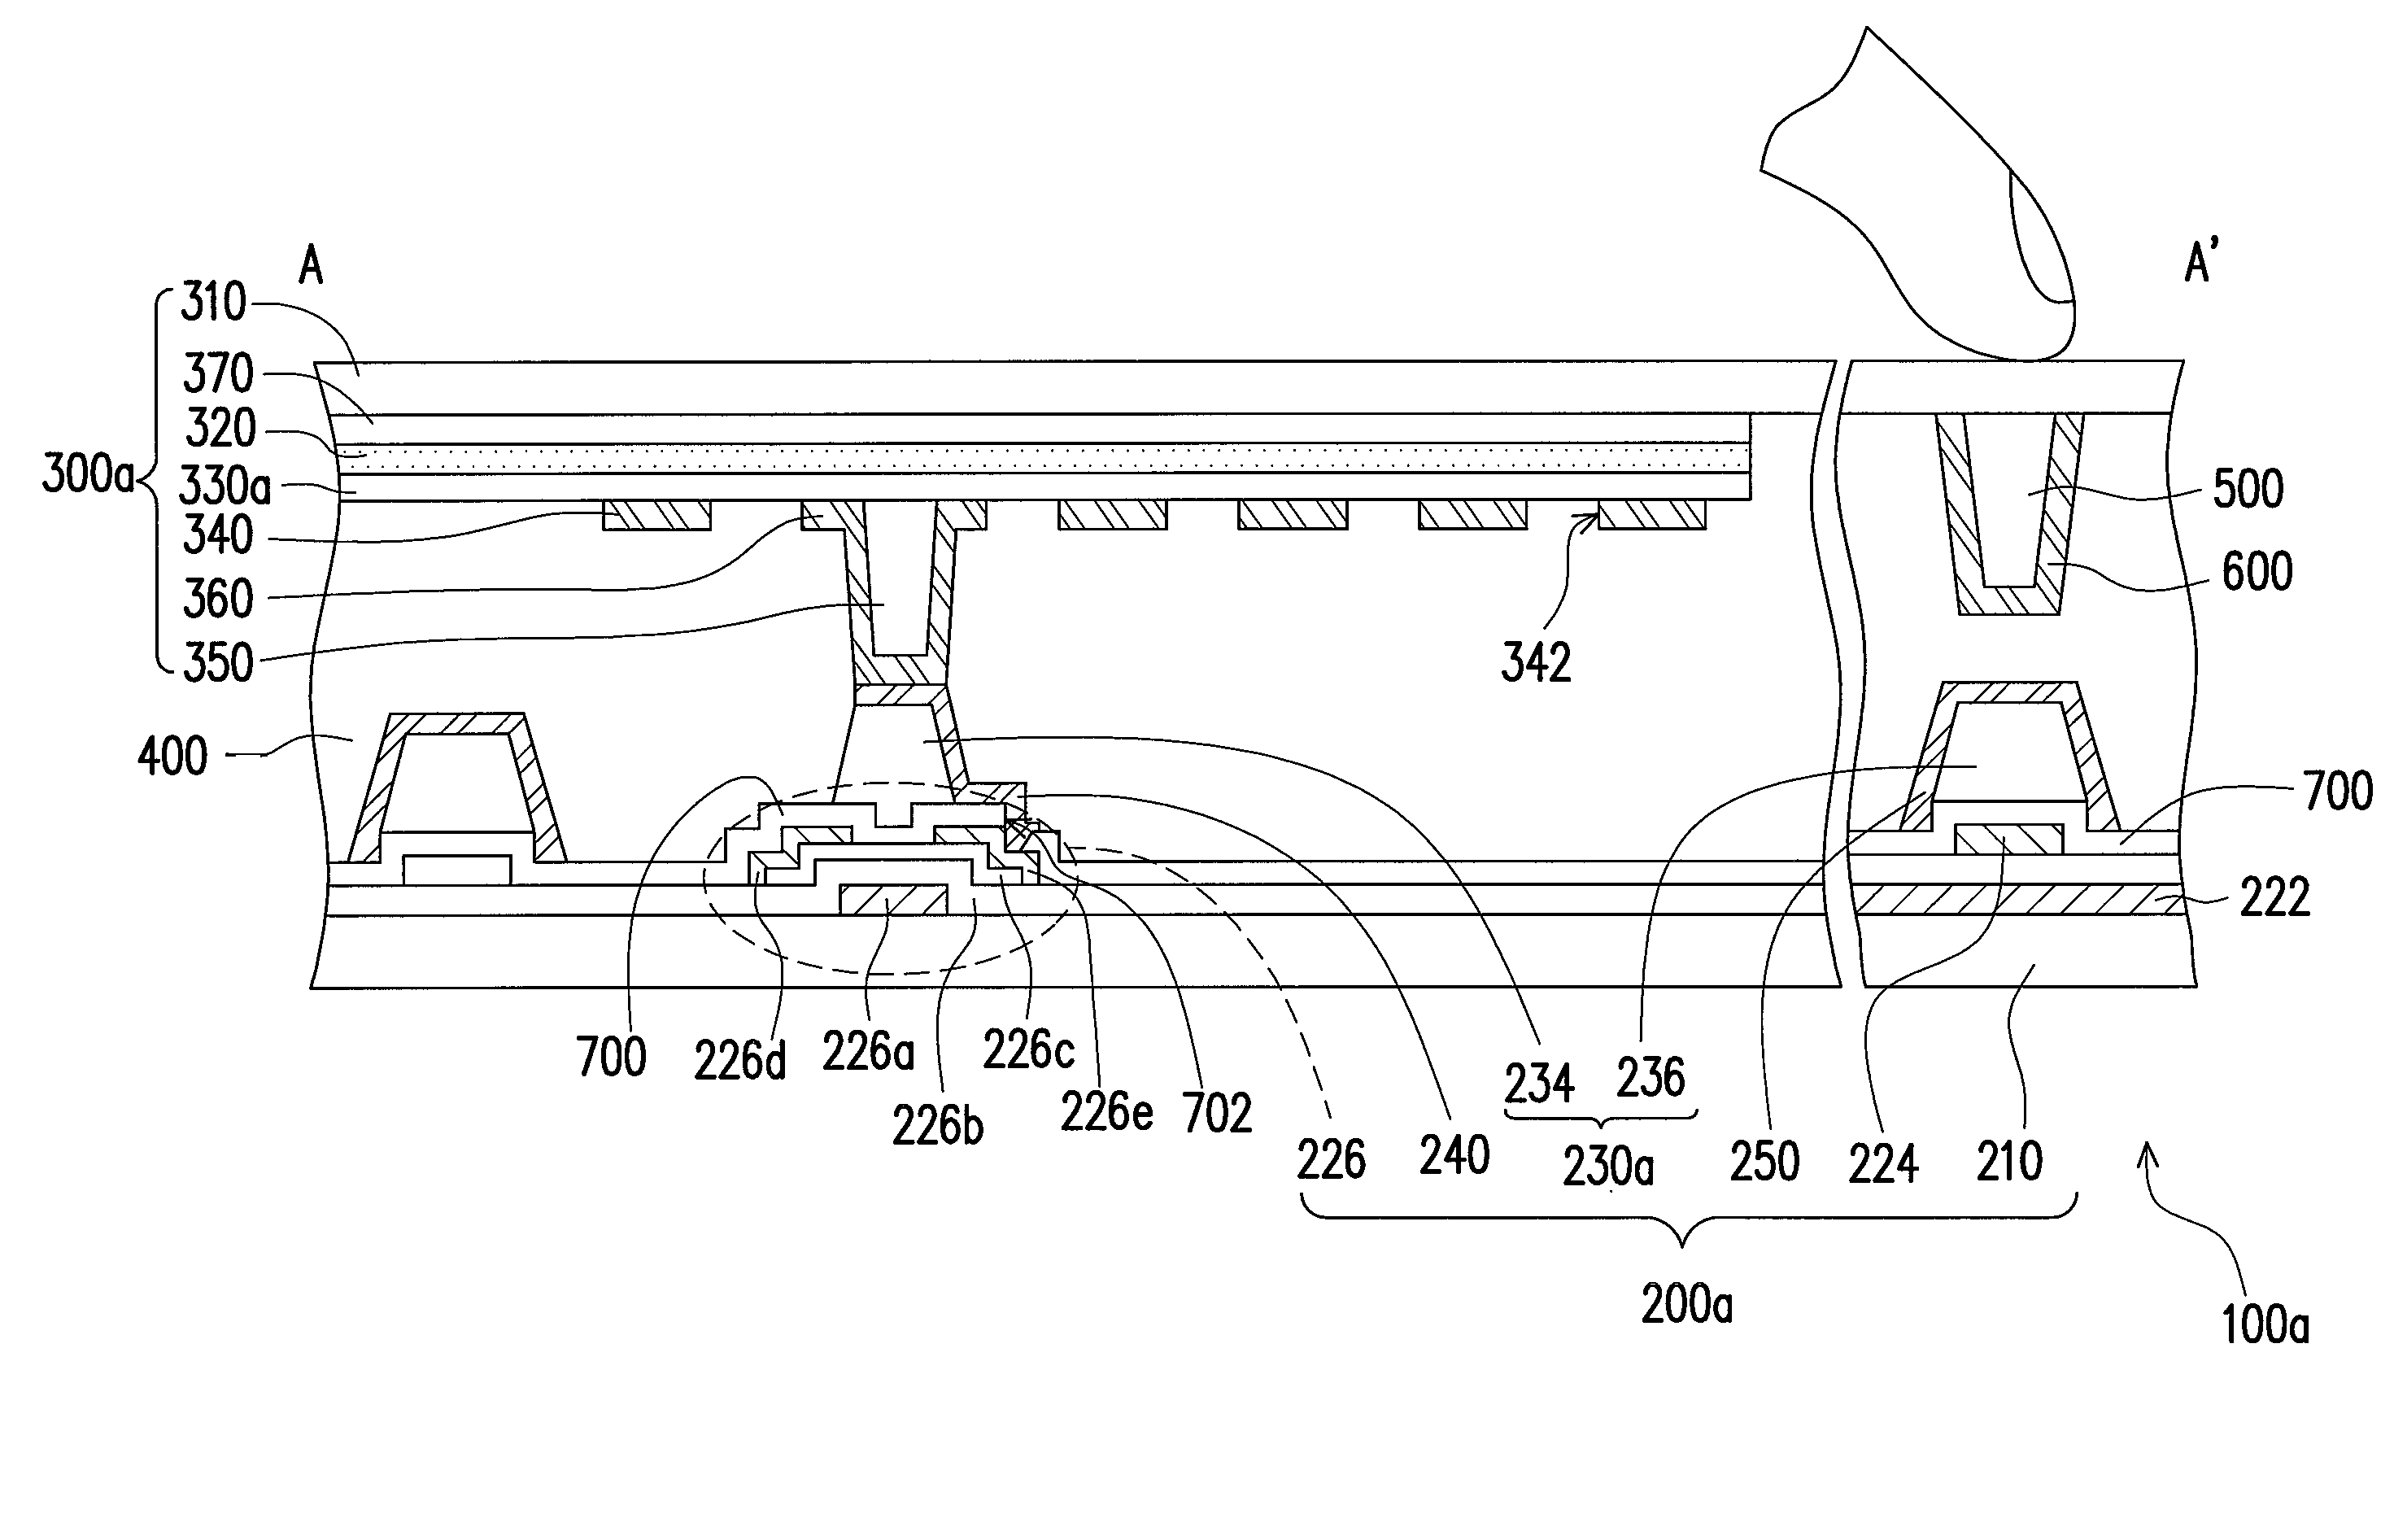 Liquid crystal display panel comprising first connecting electrodes disposed on a padding device and electrically connected to active devices and to second connecting electrodes